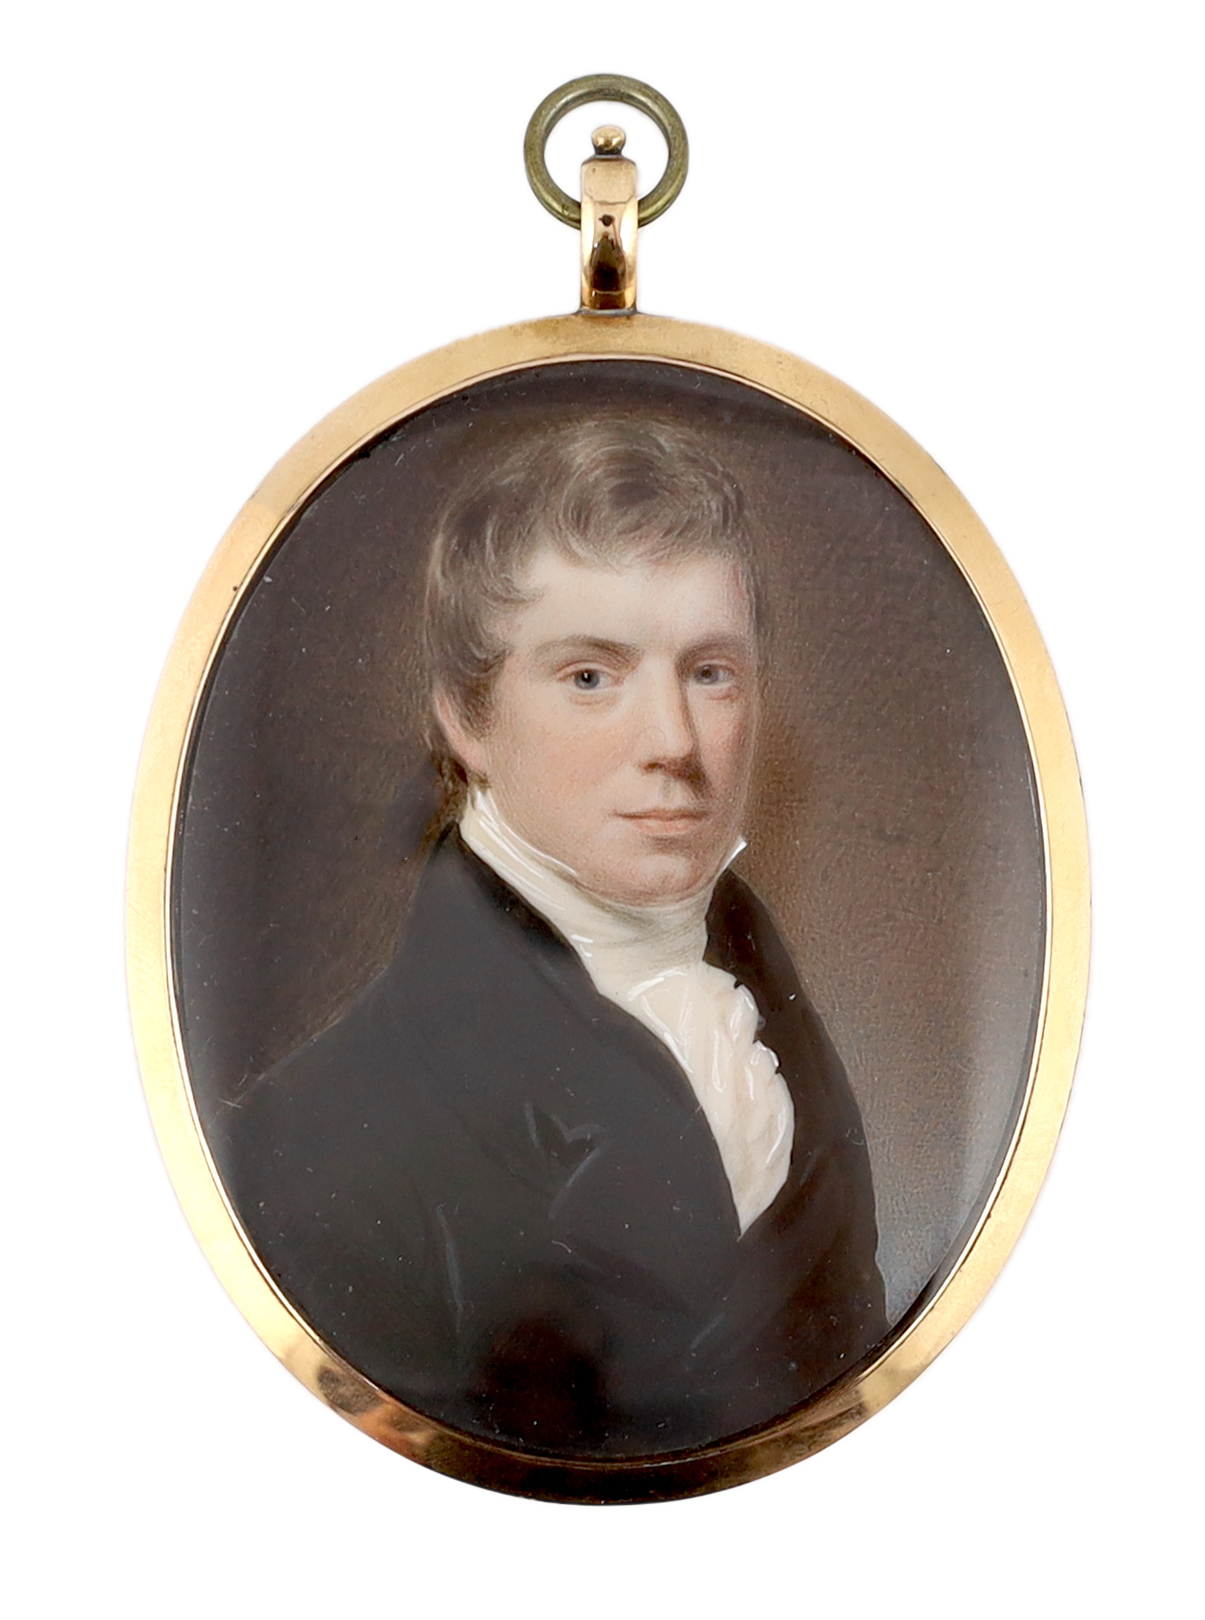 George Patten ARA (British, 1801-1865), Portrait miniature of a gentleman, watercolour on ivory, 6.5 x 5.1cm. CITES Submission reference JHF31LAF